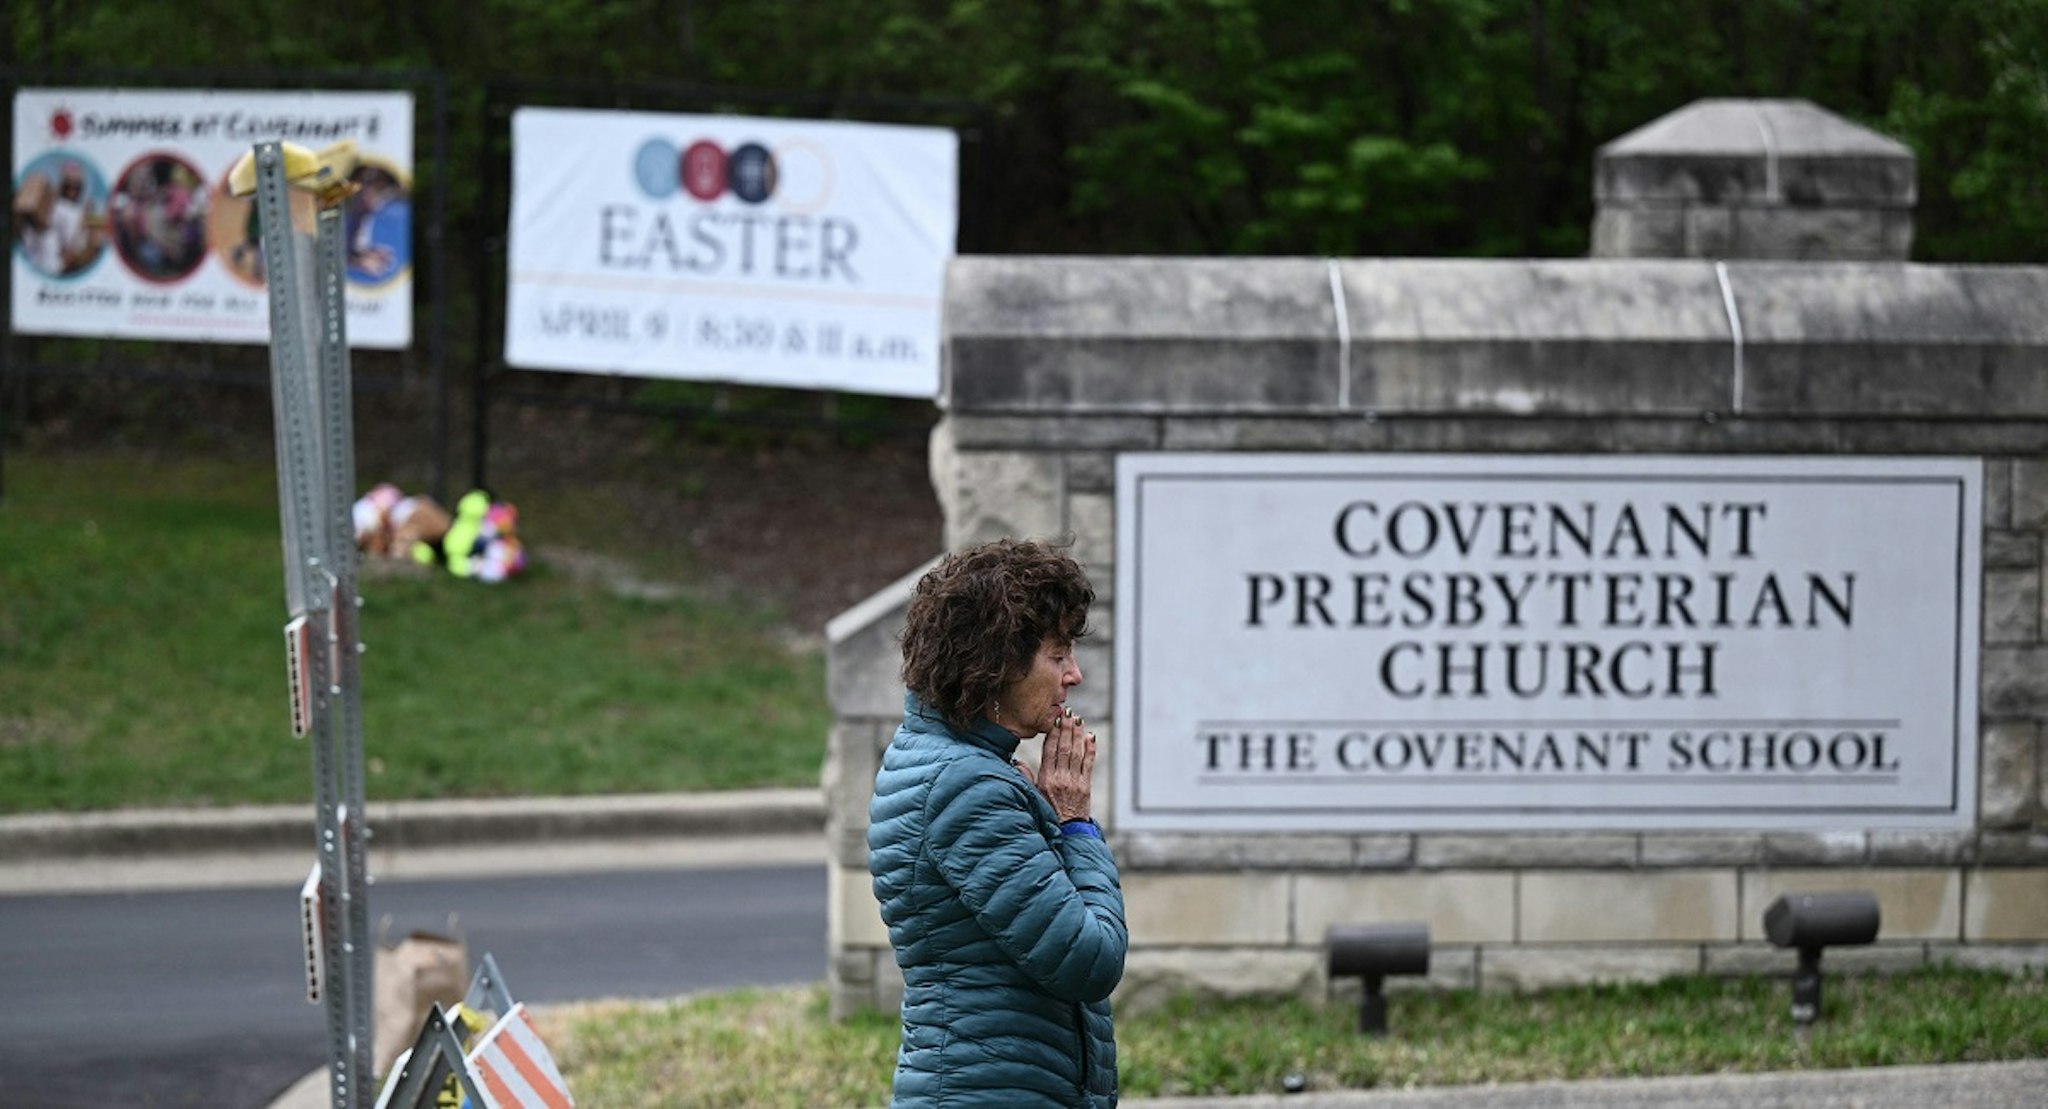 Robin Wolfenden prays at a makeshift memorial for victims outside the Covenant School building at the Covenant Presbyterian Church following a shooting, in Nashville, Tennessee, on March 28, 2023.